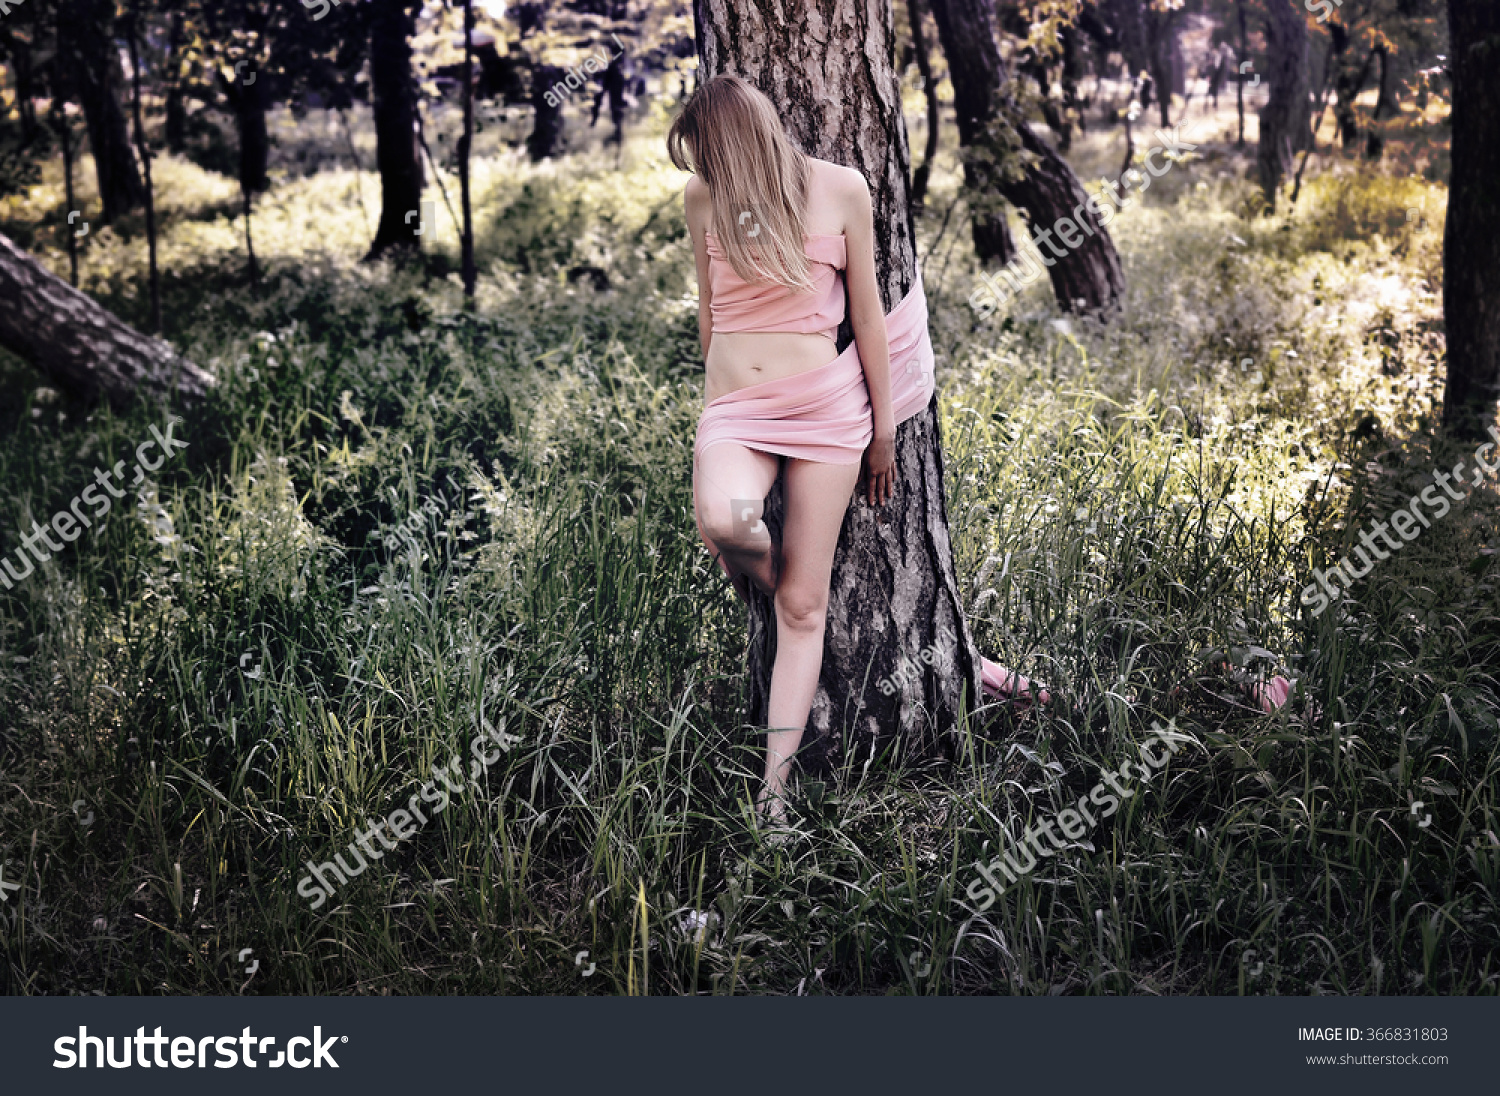 Naked Woman In The Forest 95